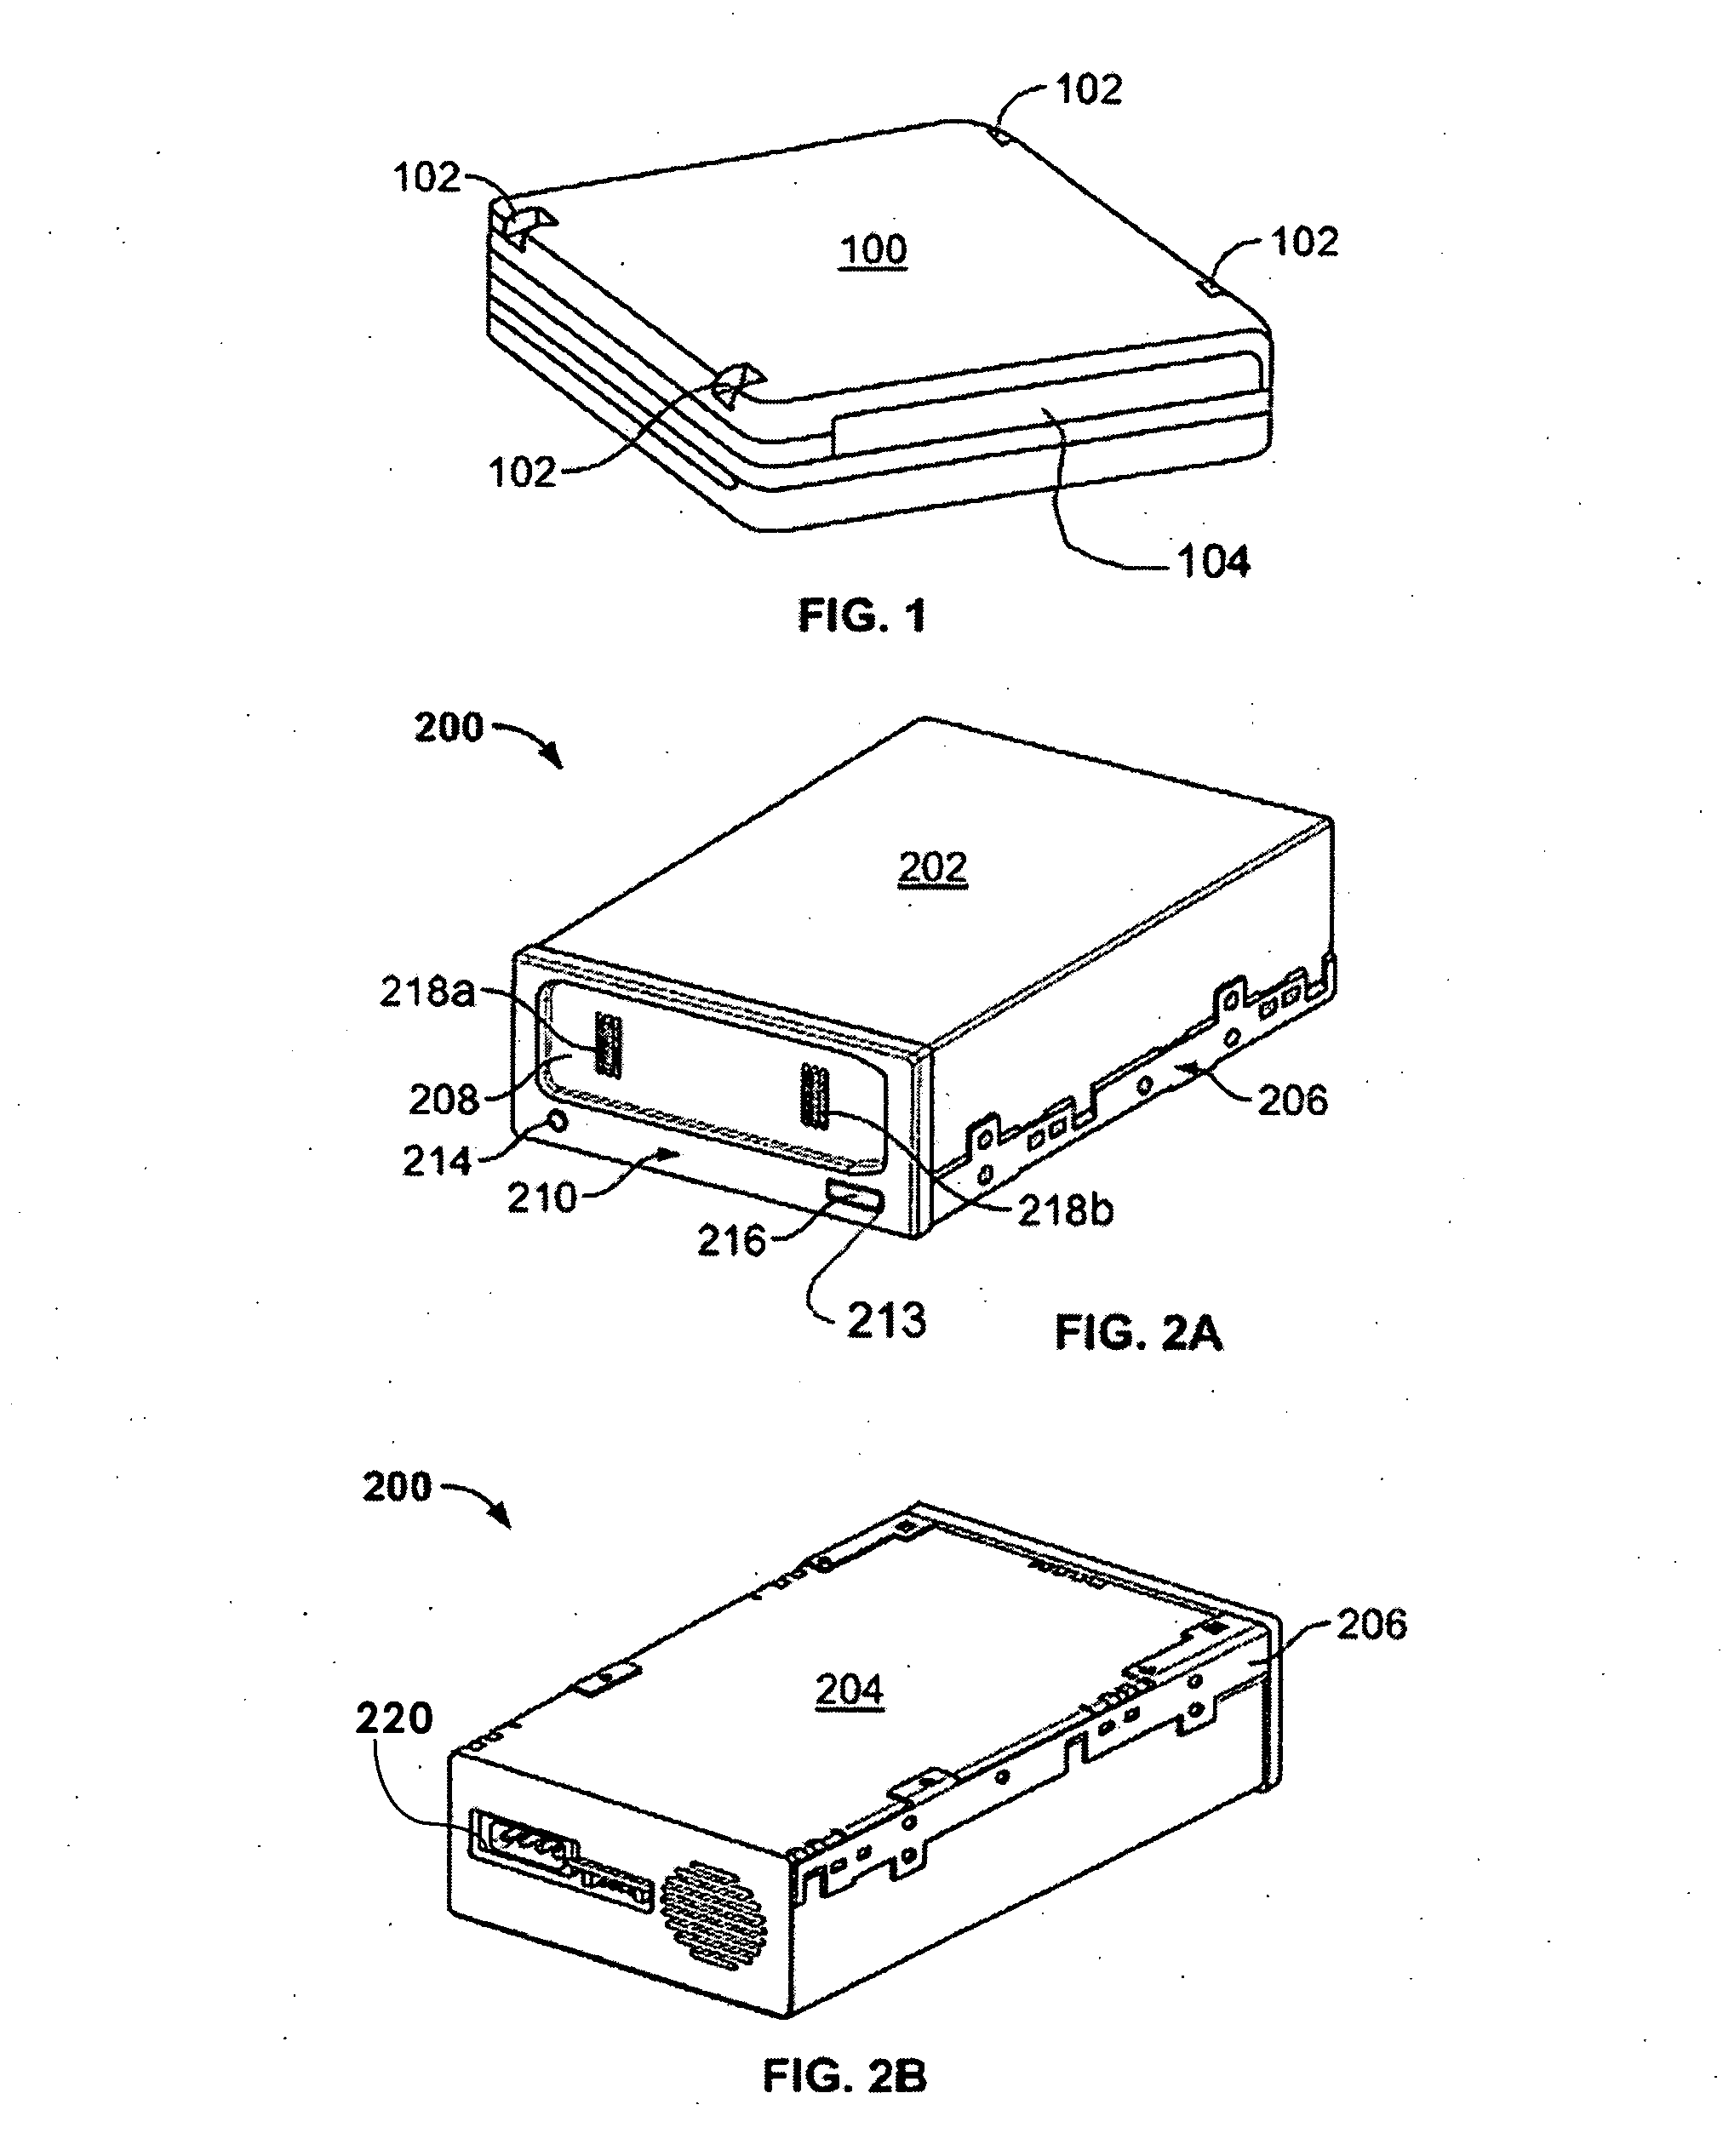 Data flow control and bridging architecture enhancing performance of removable data storage systems